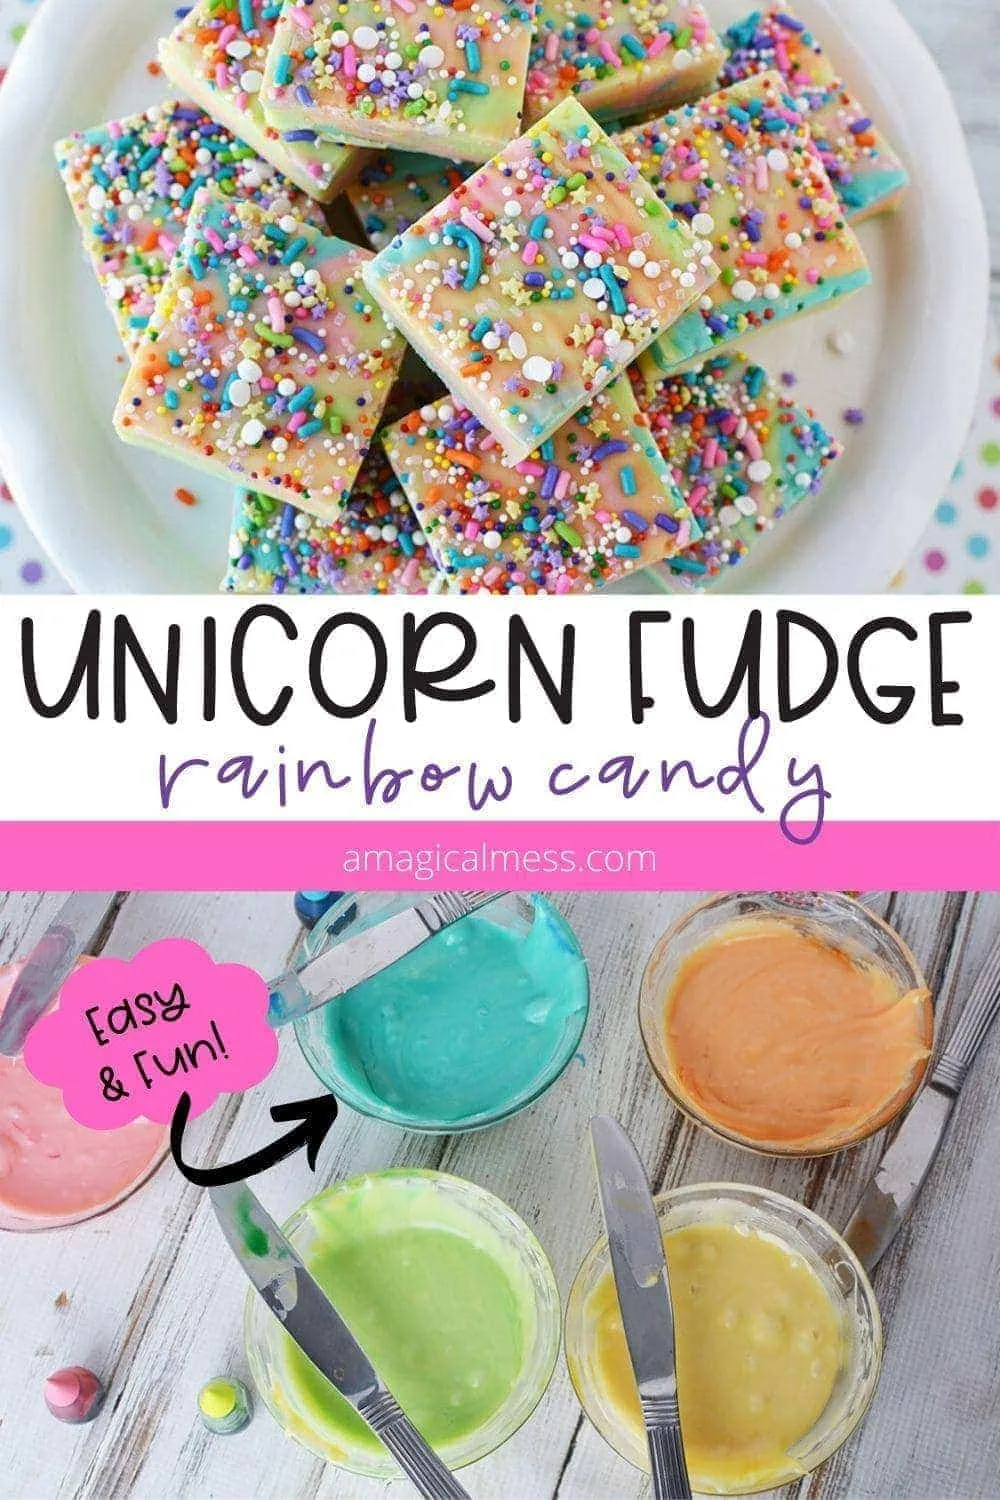 Unicorn fudge on a plate and colored in bowls